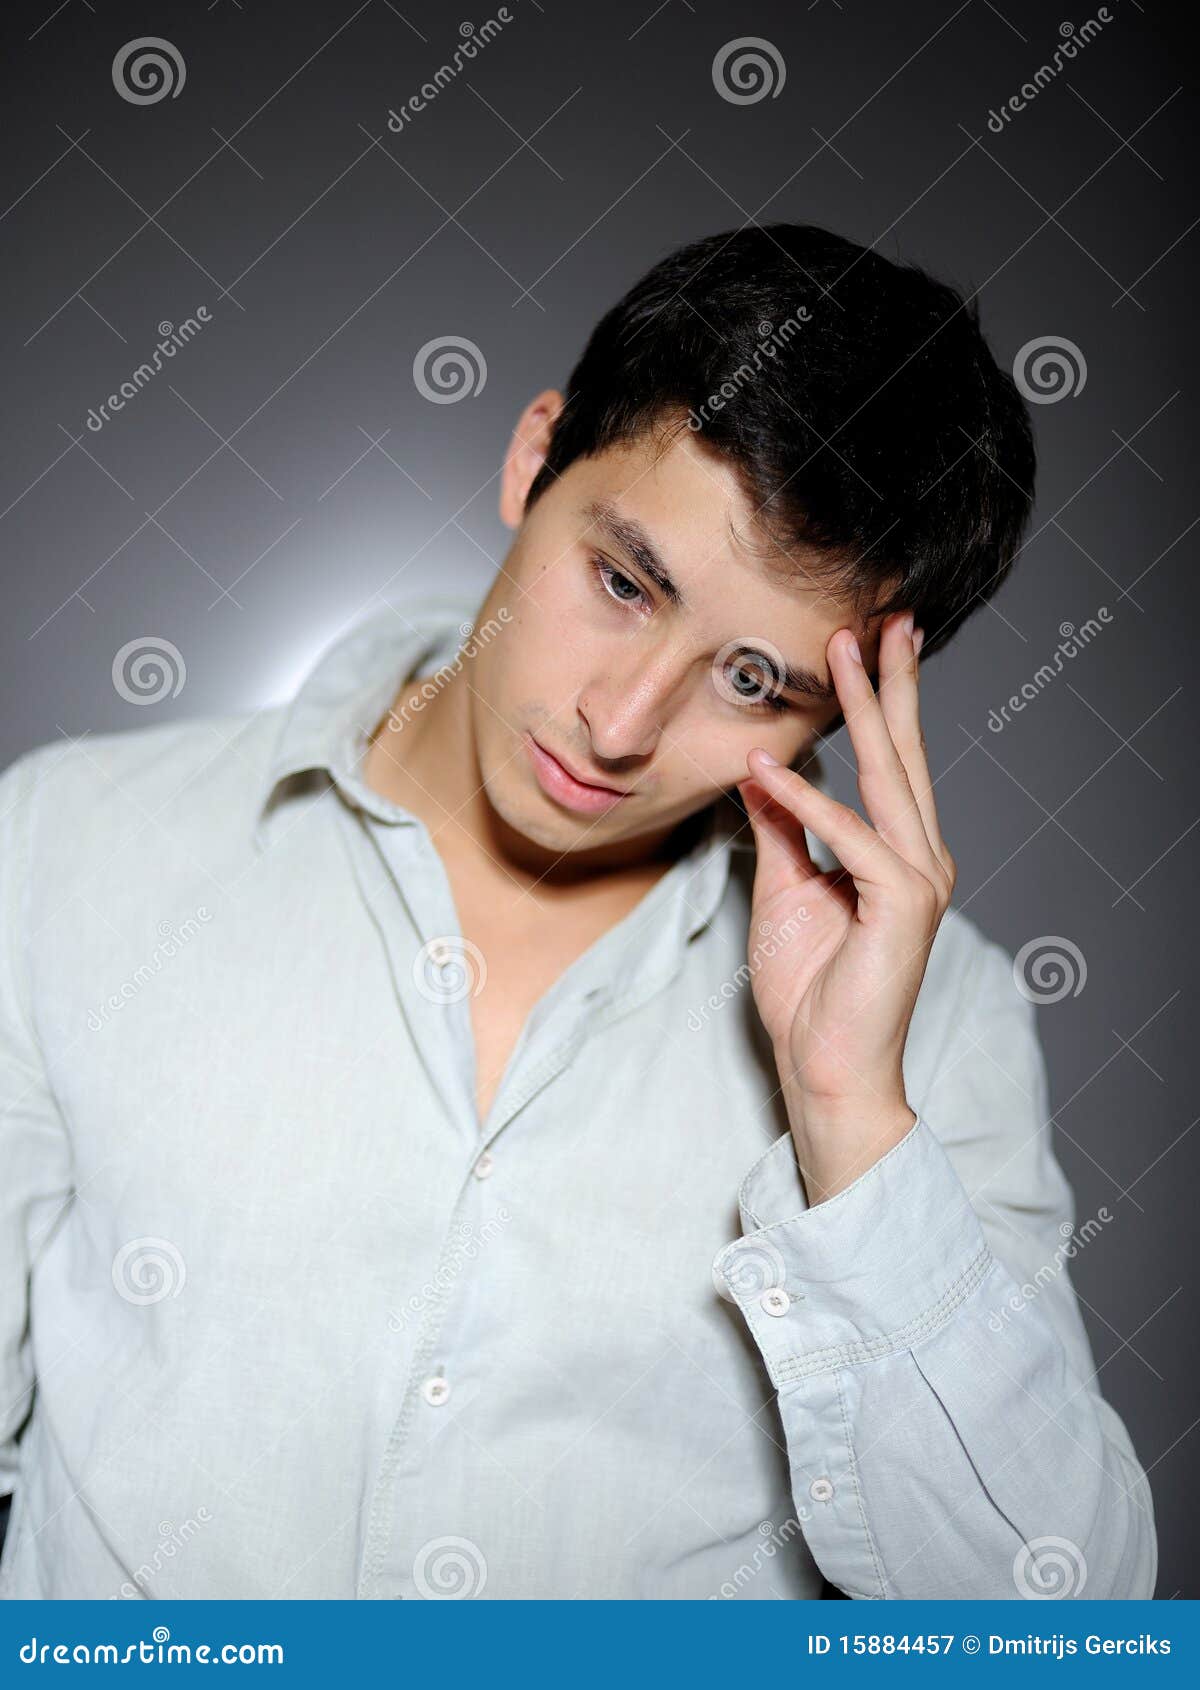 Expressions.man Feeling Sad and Depressed Stock Image - Image of ...